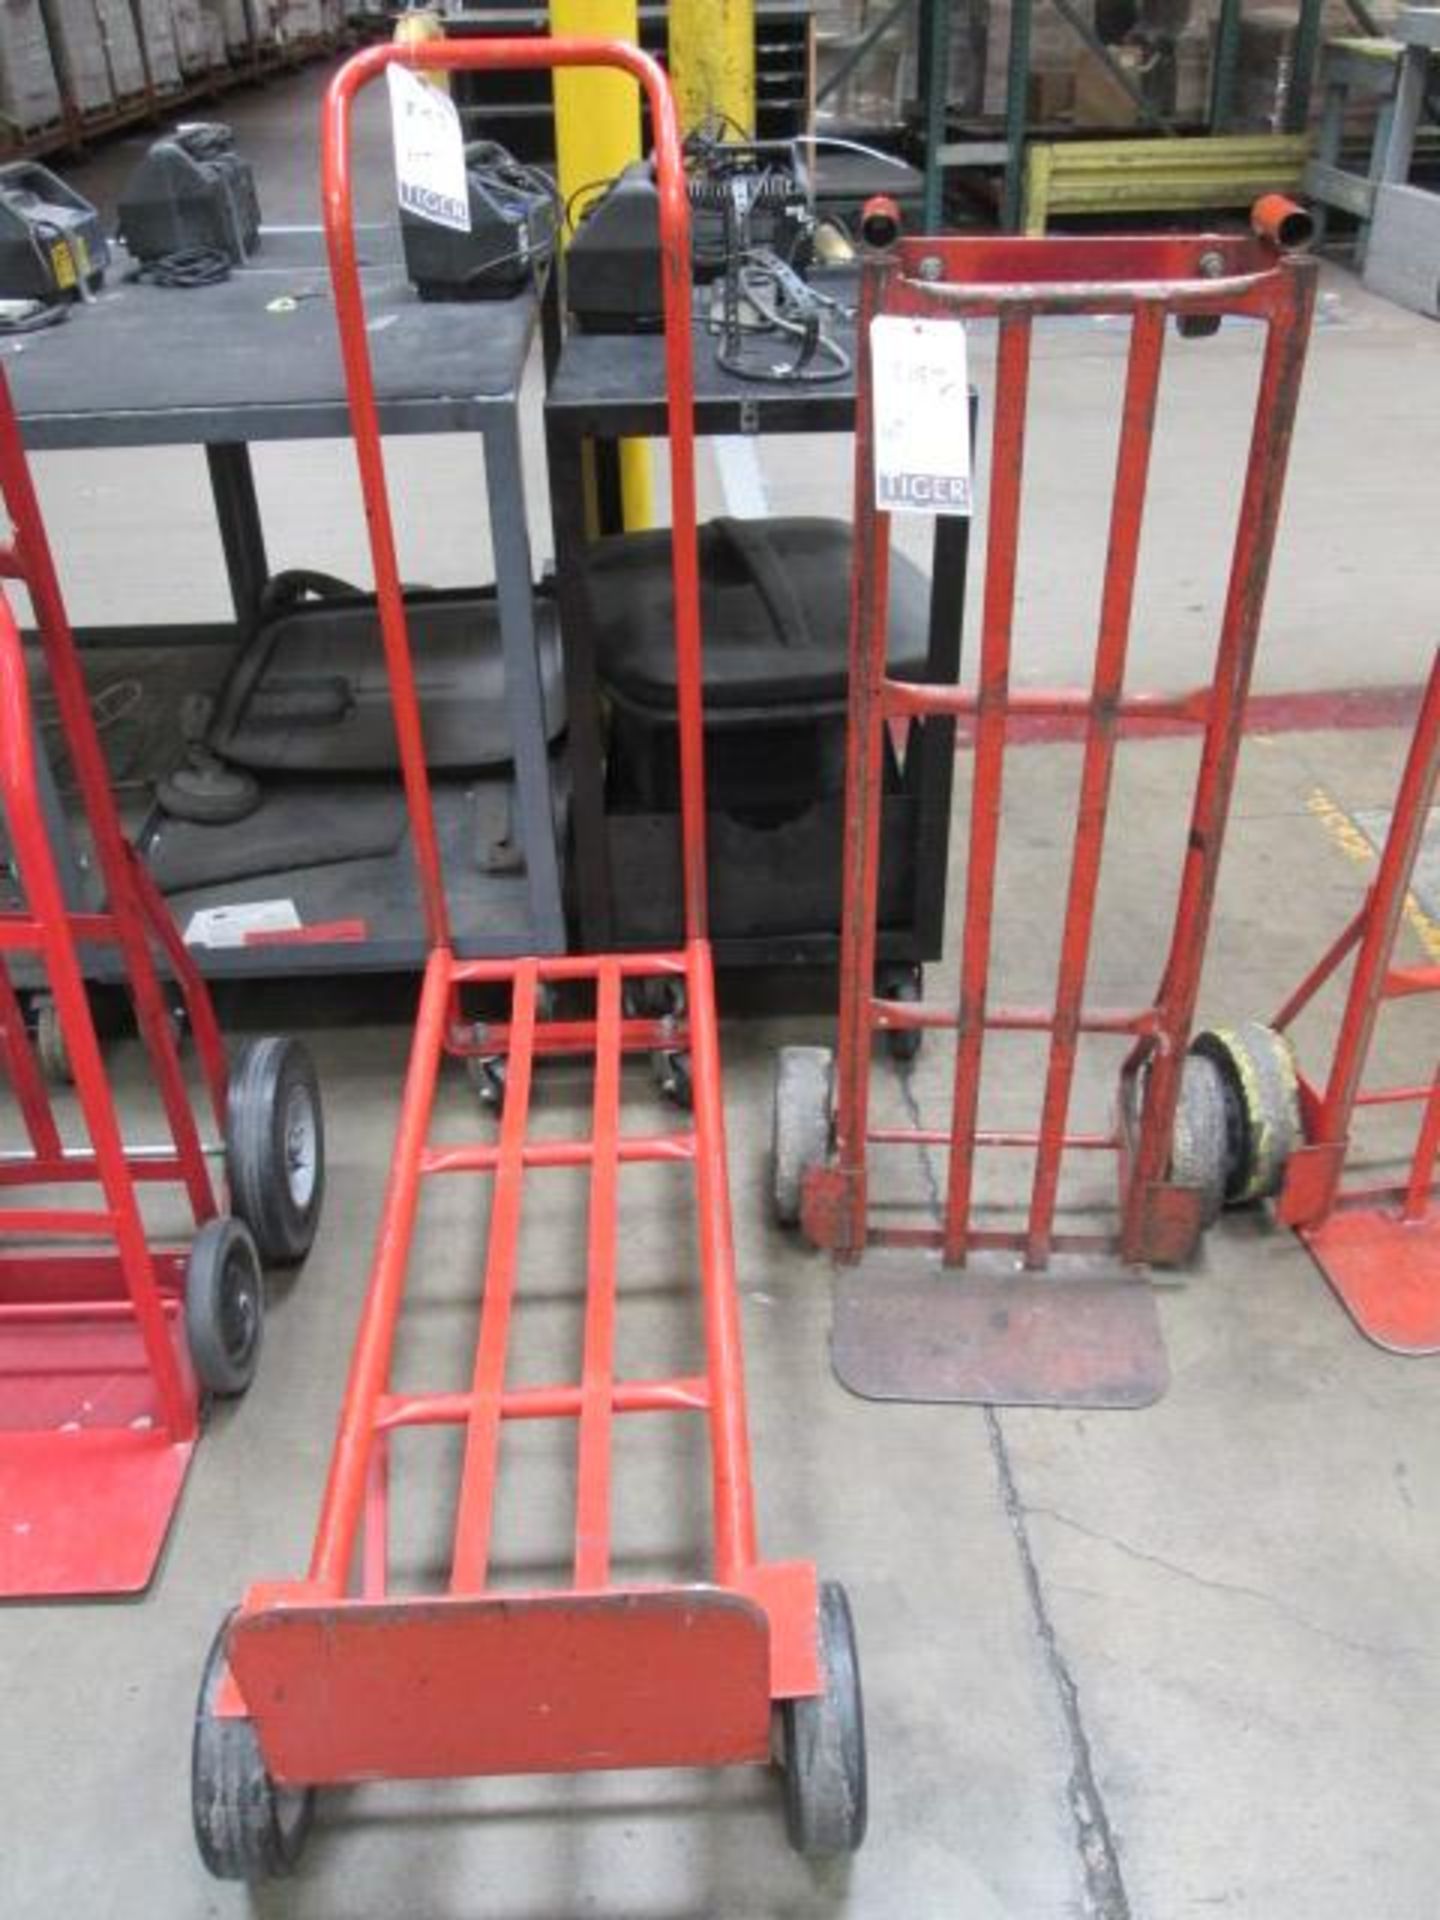 Lot (2) 4 Wheel Convertible Hand Truck. Asset Location: Front Warehouse, Site Location: Brea, CA